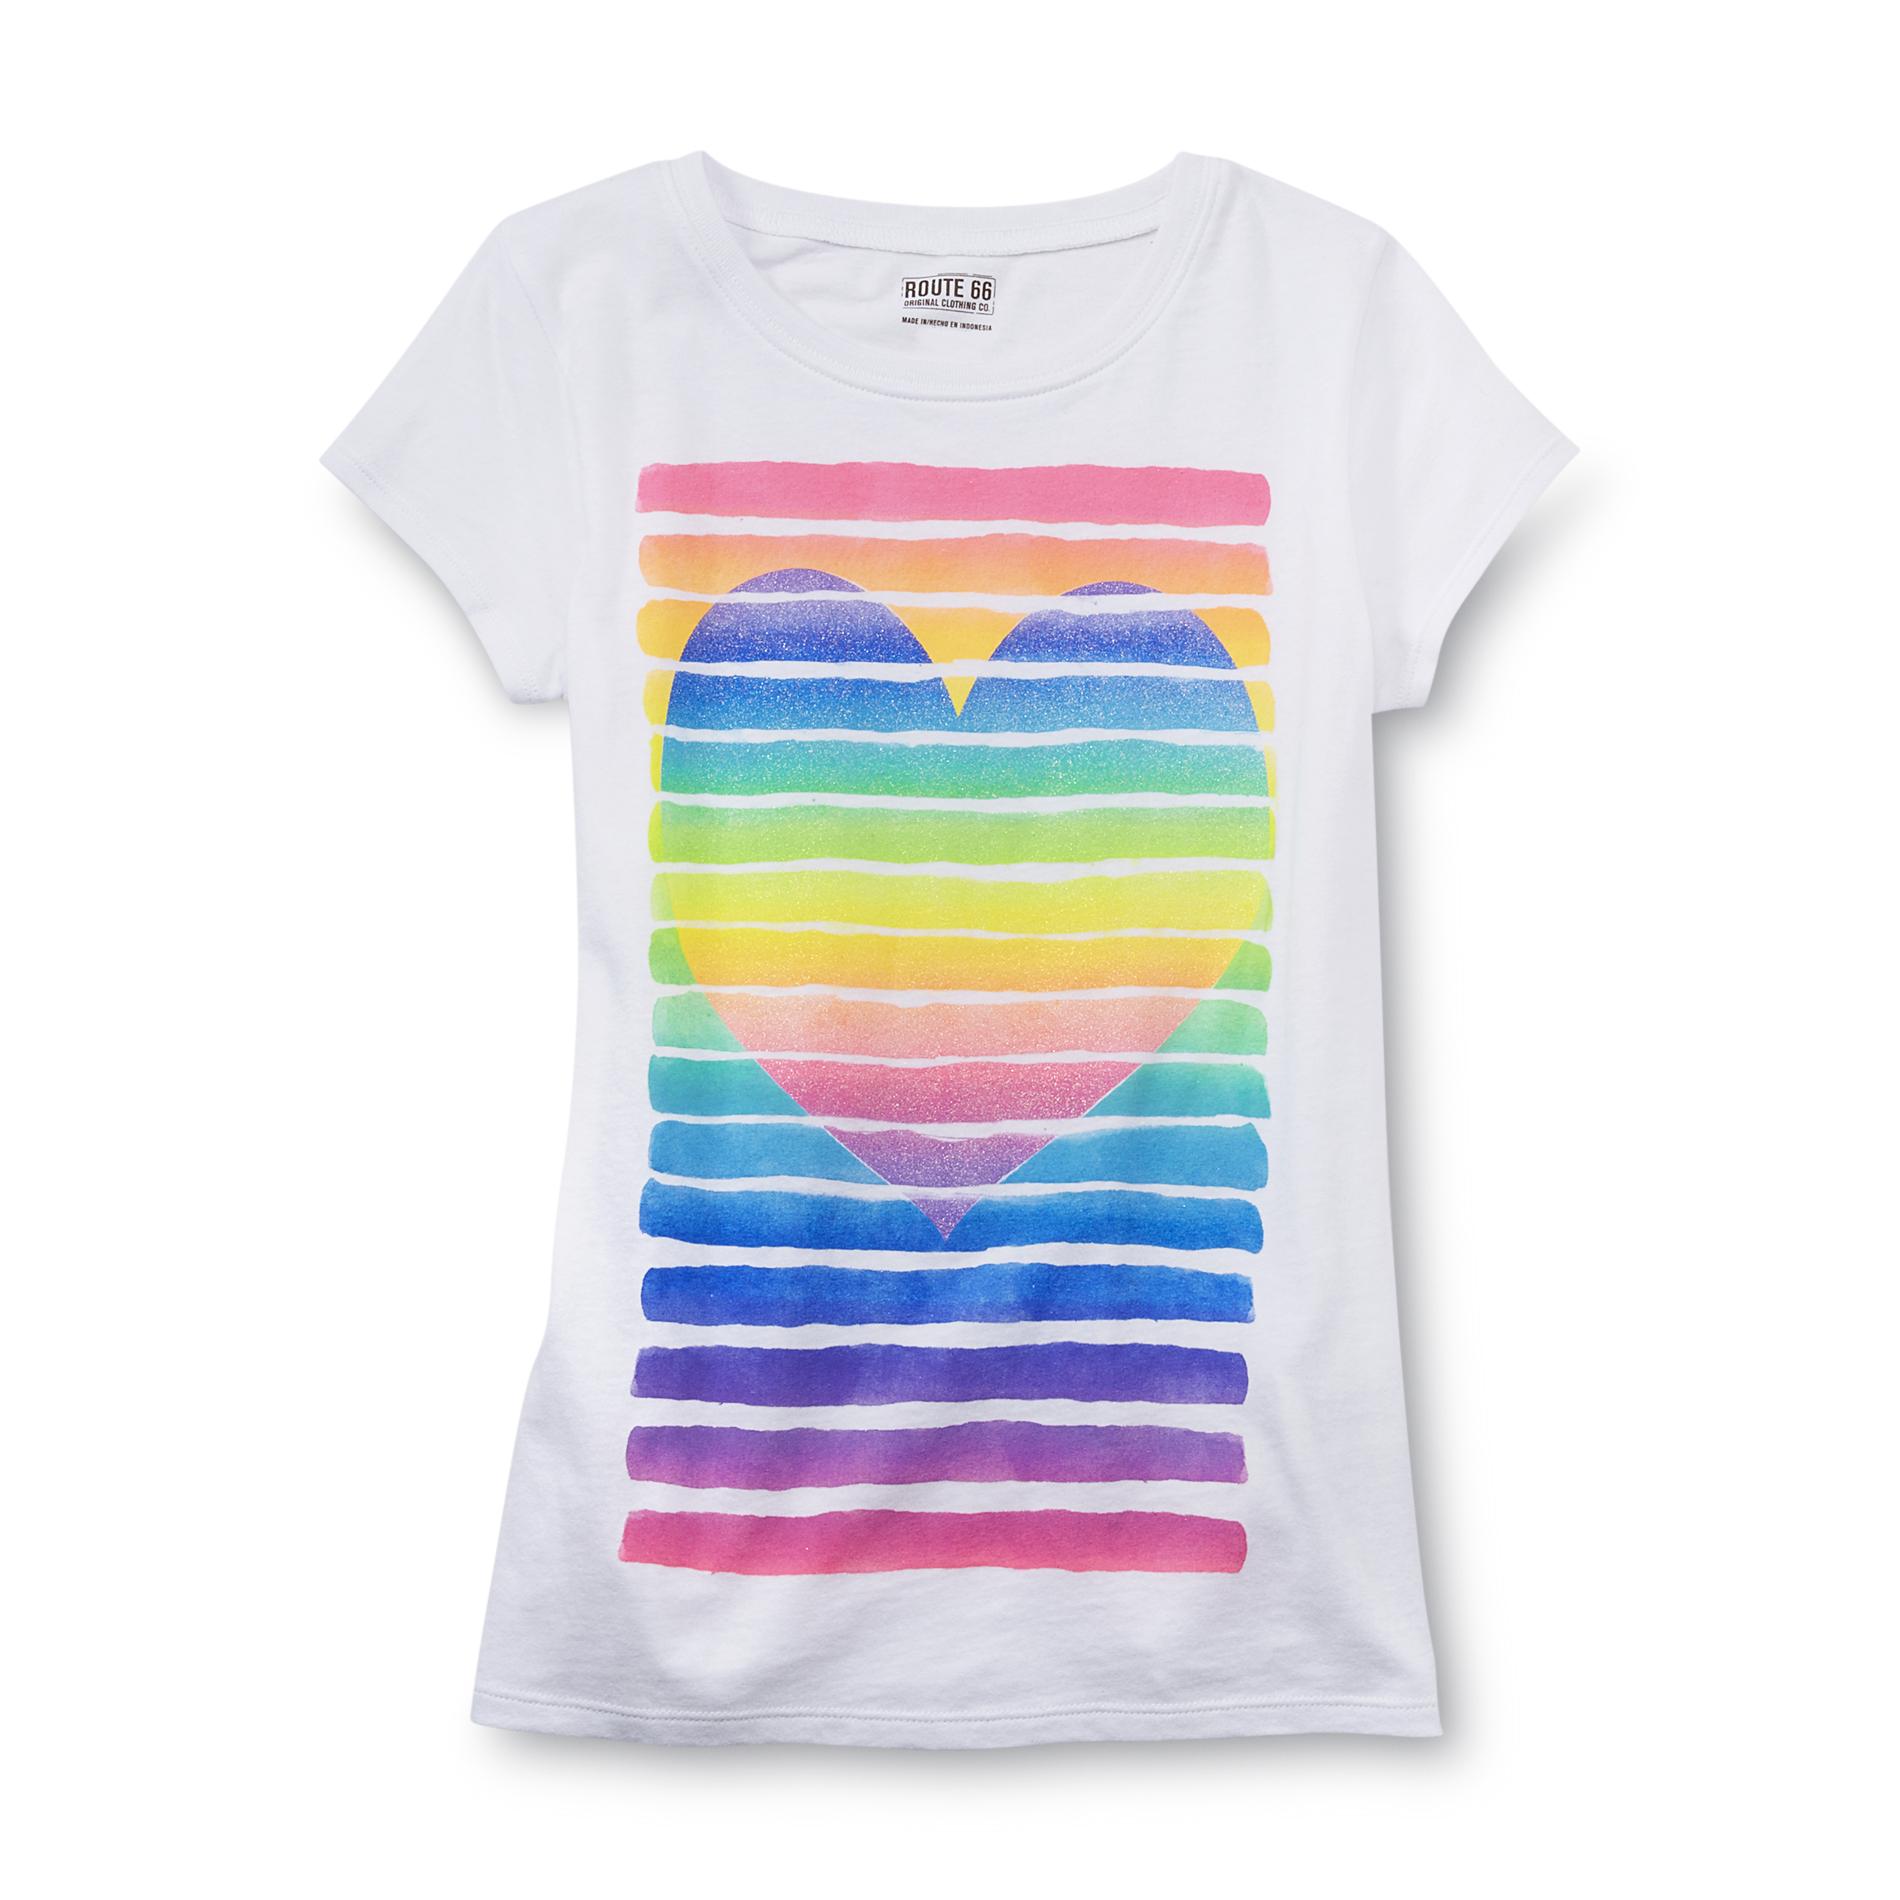 Route 66 Girl's Graphic T-Shirt - Heart